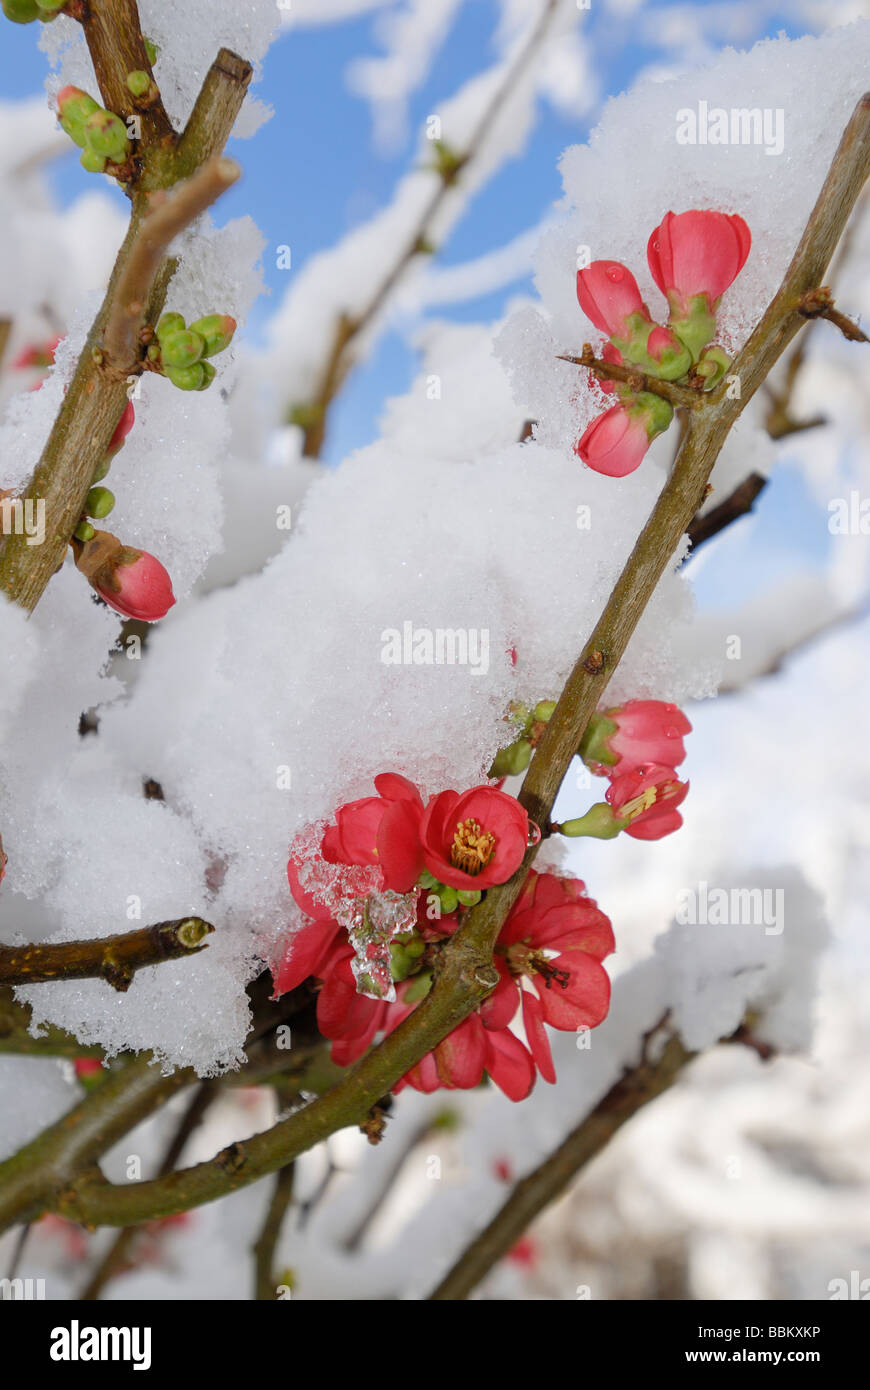 Forsytia blossom covered with snow Stock Photo